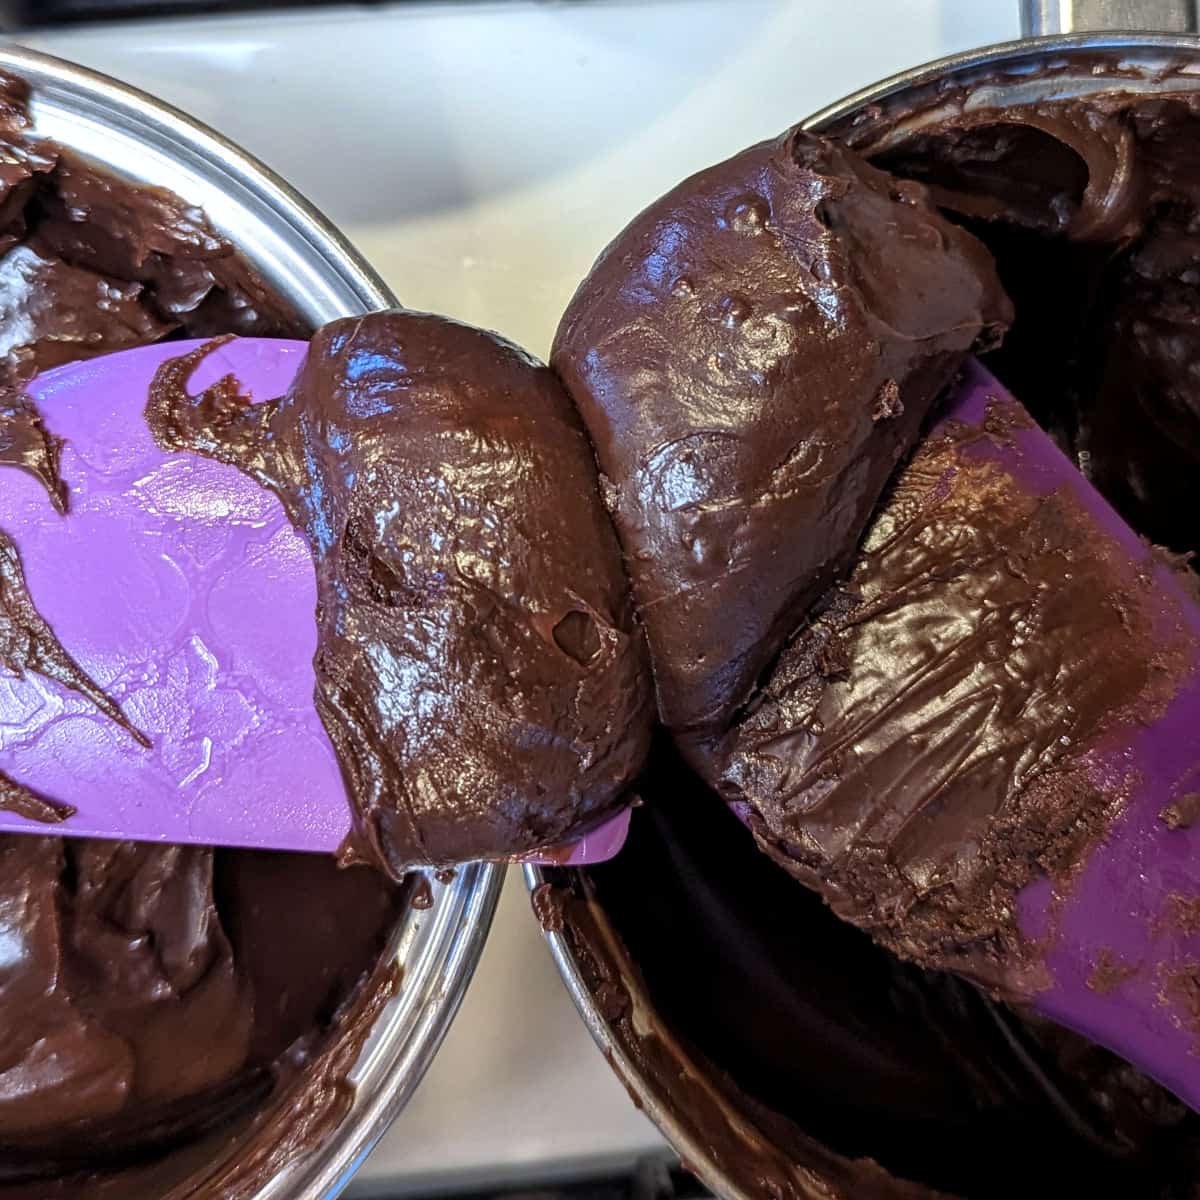 smooth, properly melted ganache on the left, with lumpy, overheated ganache on the right